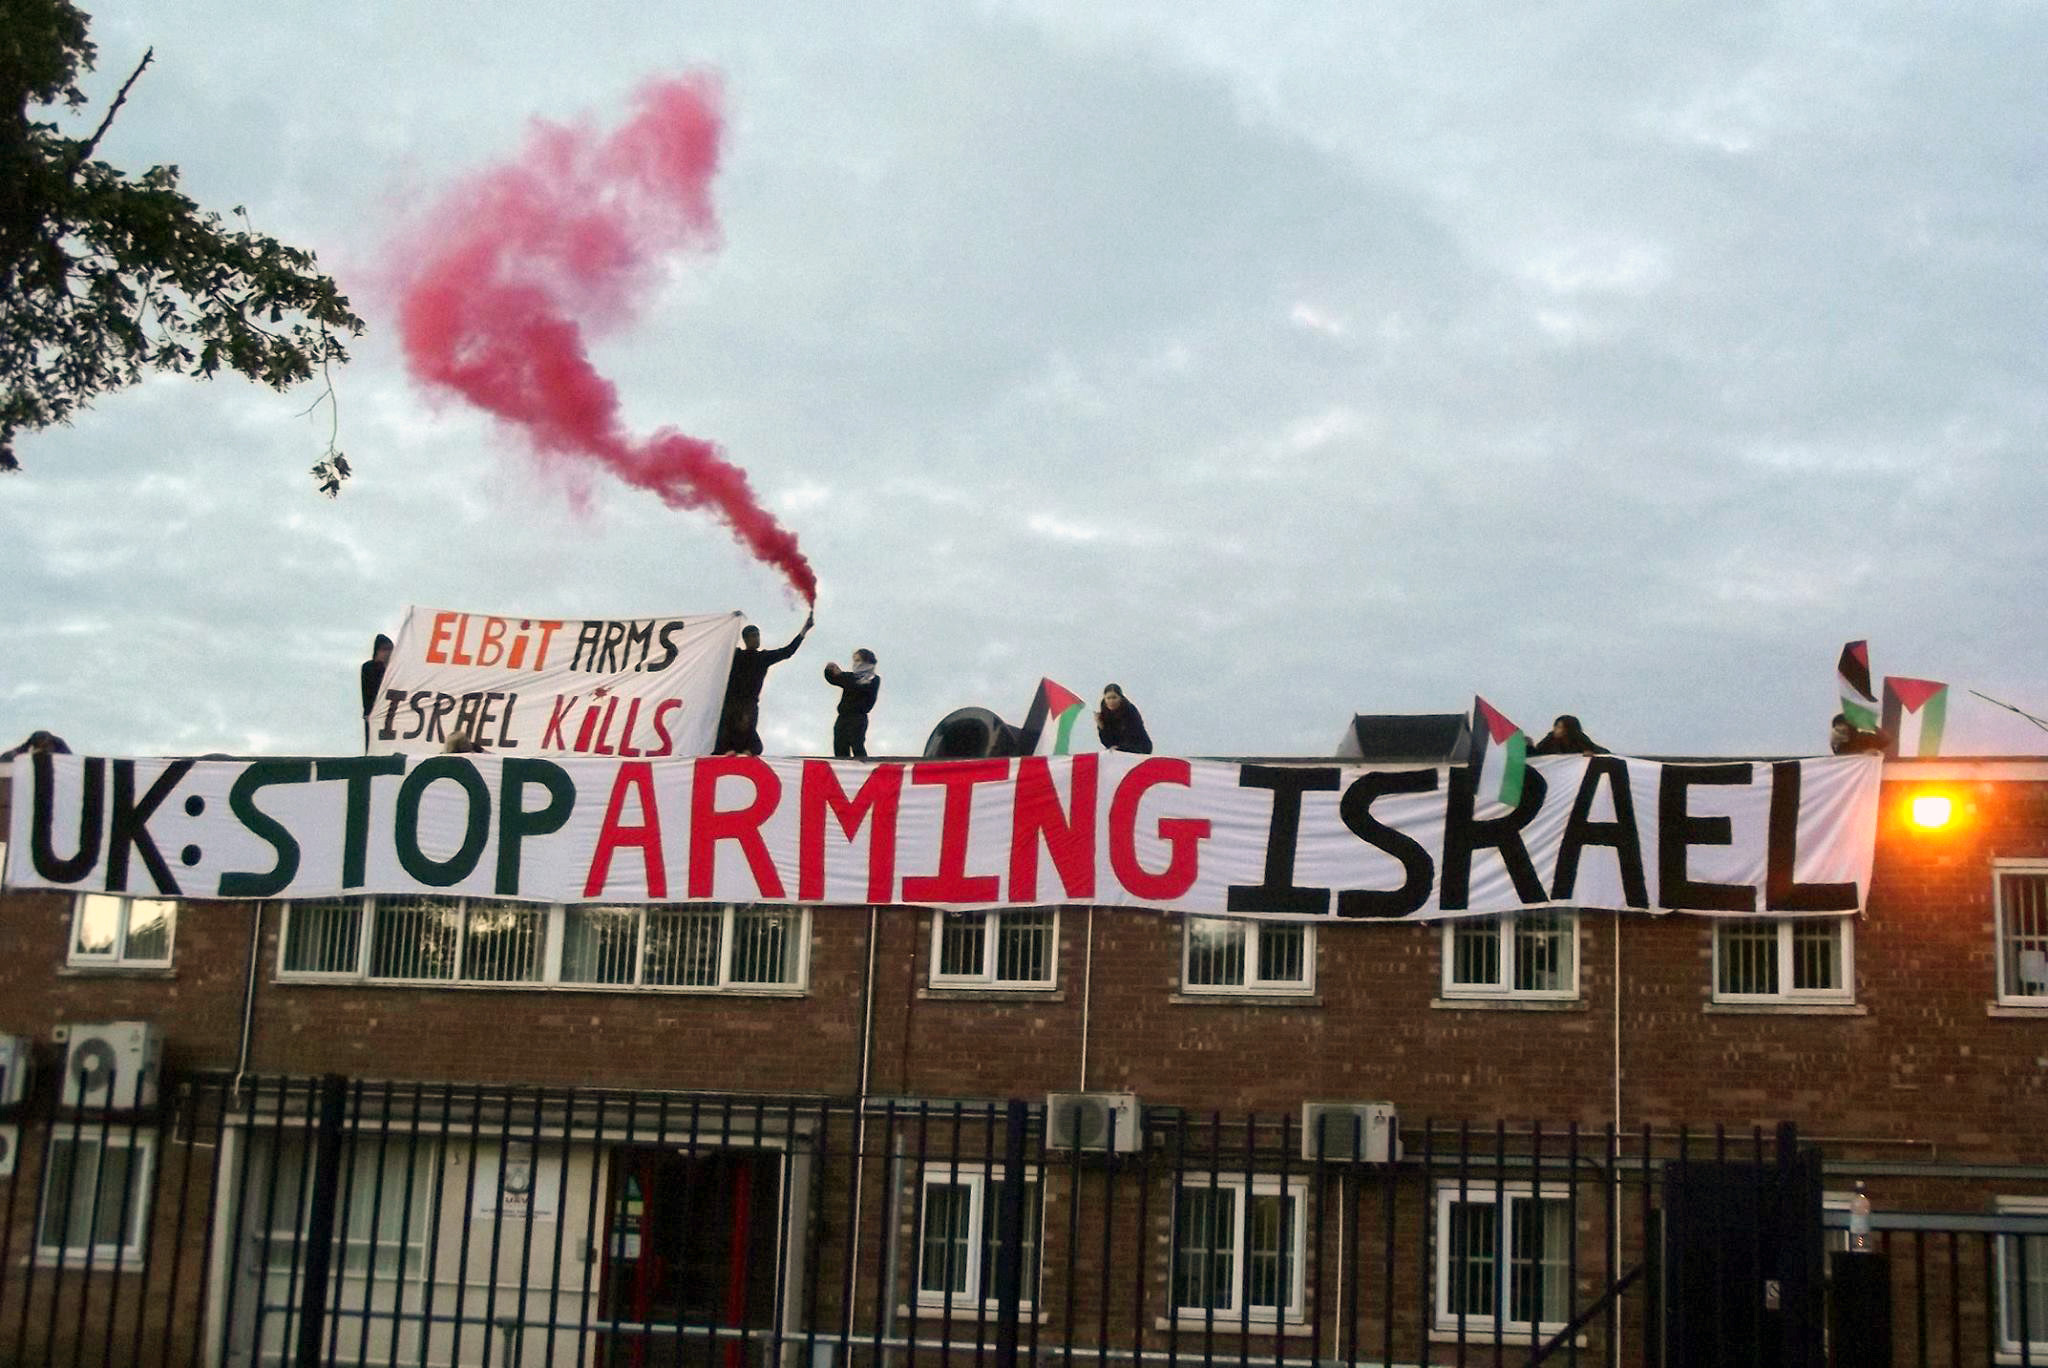 Protesters occupied the roof of Israeli drones manufacturer Elbit Systems, shutting it down for two days.